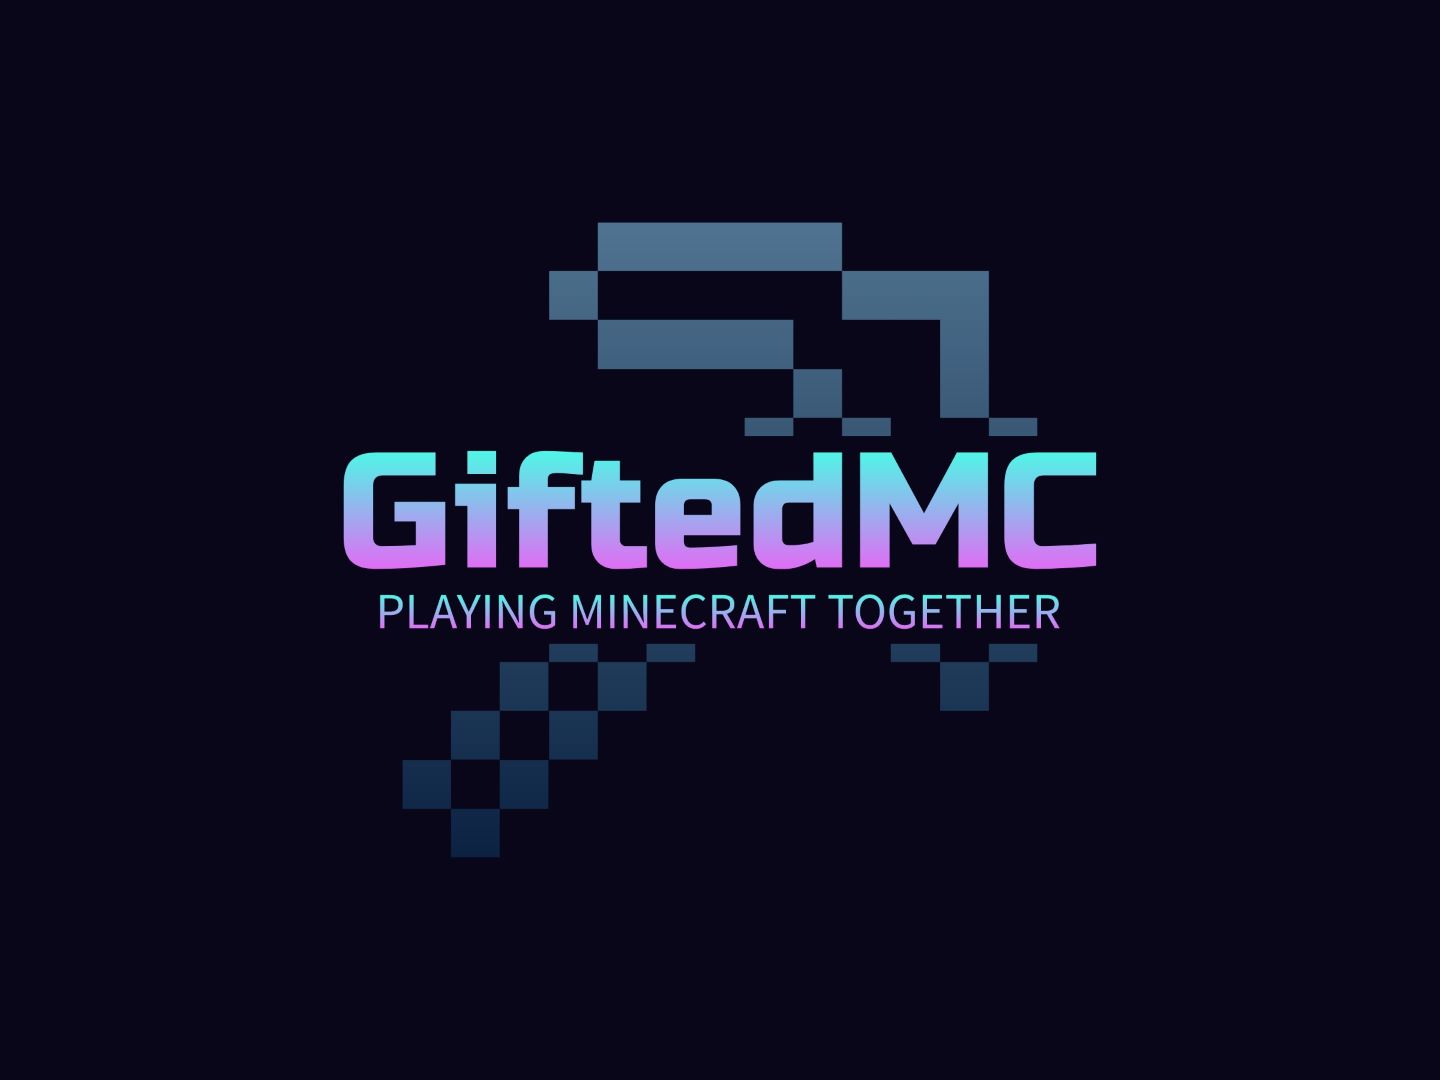 The Logo of Gifted Minecraft, displaying a pixelated pickaxe.